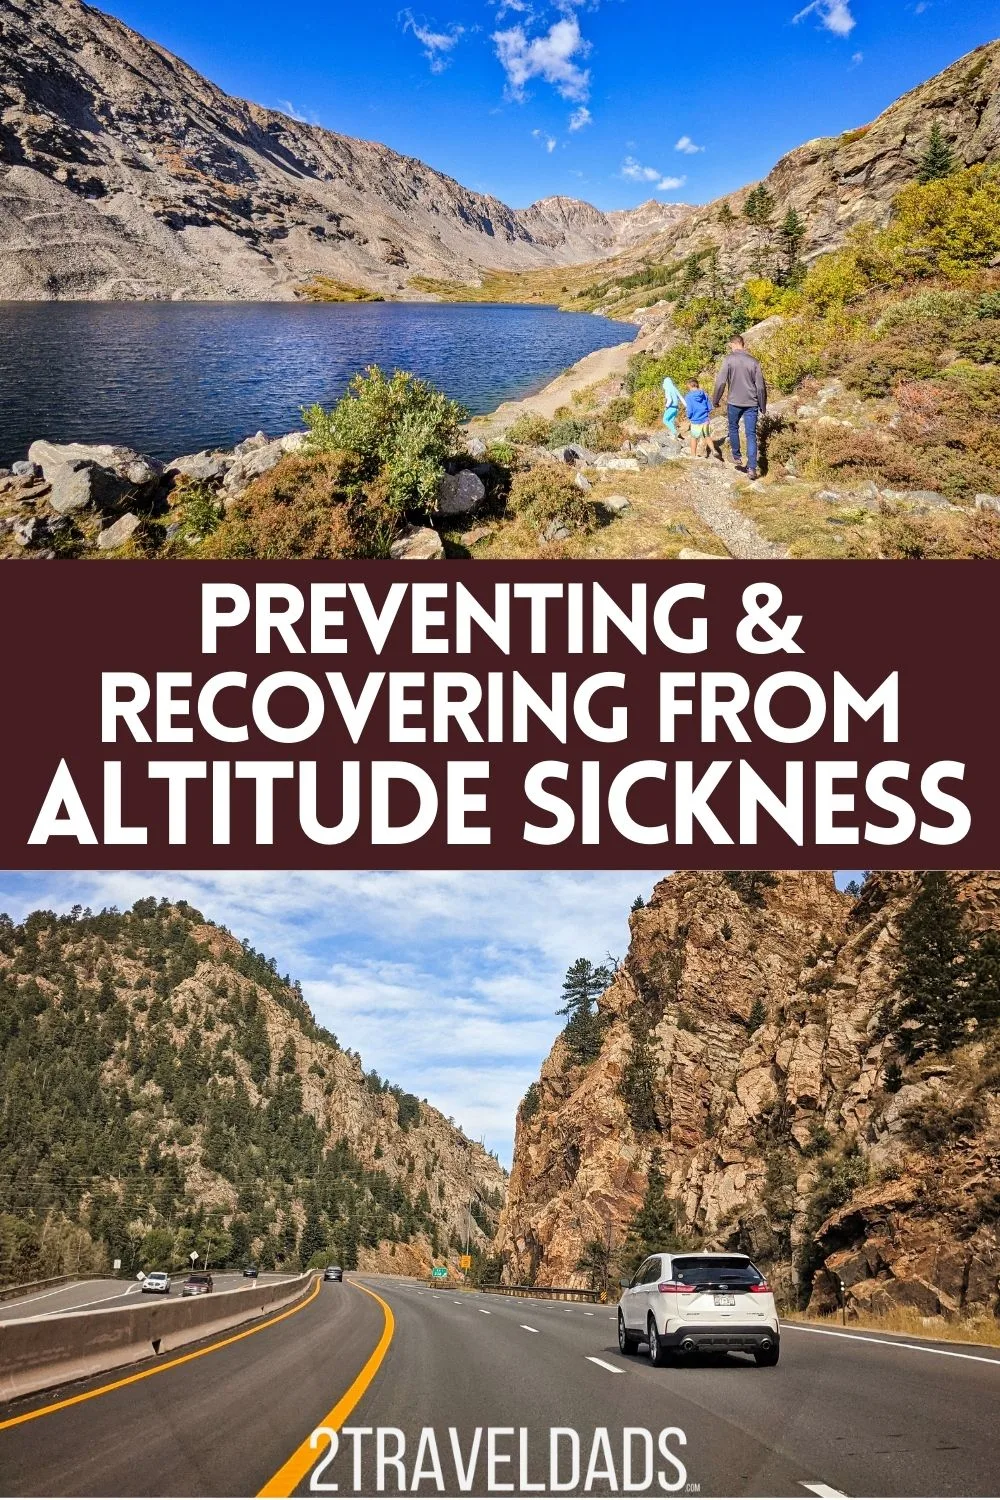 Traveling to higher elevations can cause altitude sickness after a short period. Here is how to prevent and recover from altitude sickness, also called acute mountain illness, and be able to enjoy traveling to gorgeous mountain destinations.